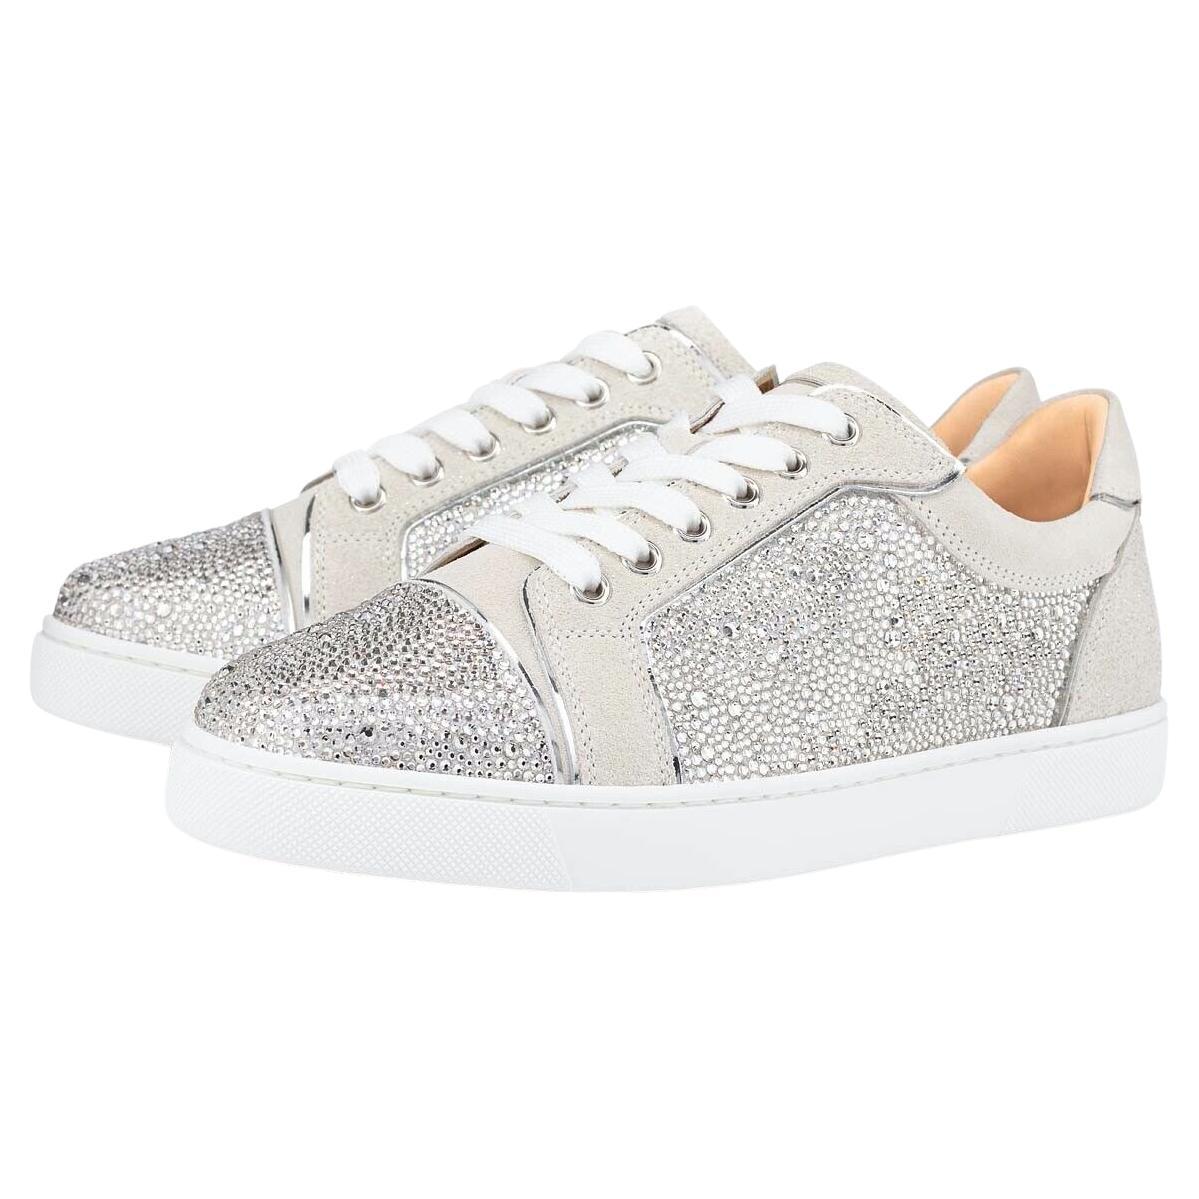 Christian Louboutin Viera Strass Flat Lune Grey Crystal Sneakers Sz 39 For Sale